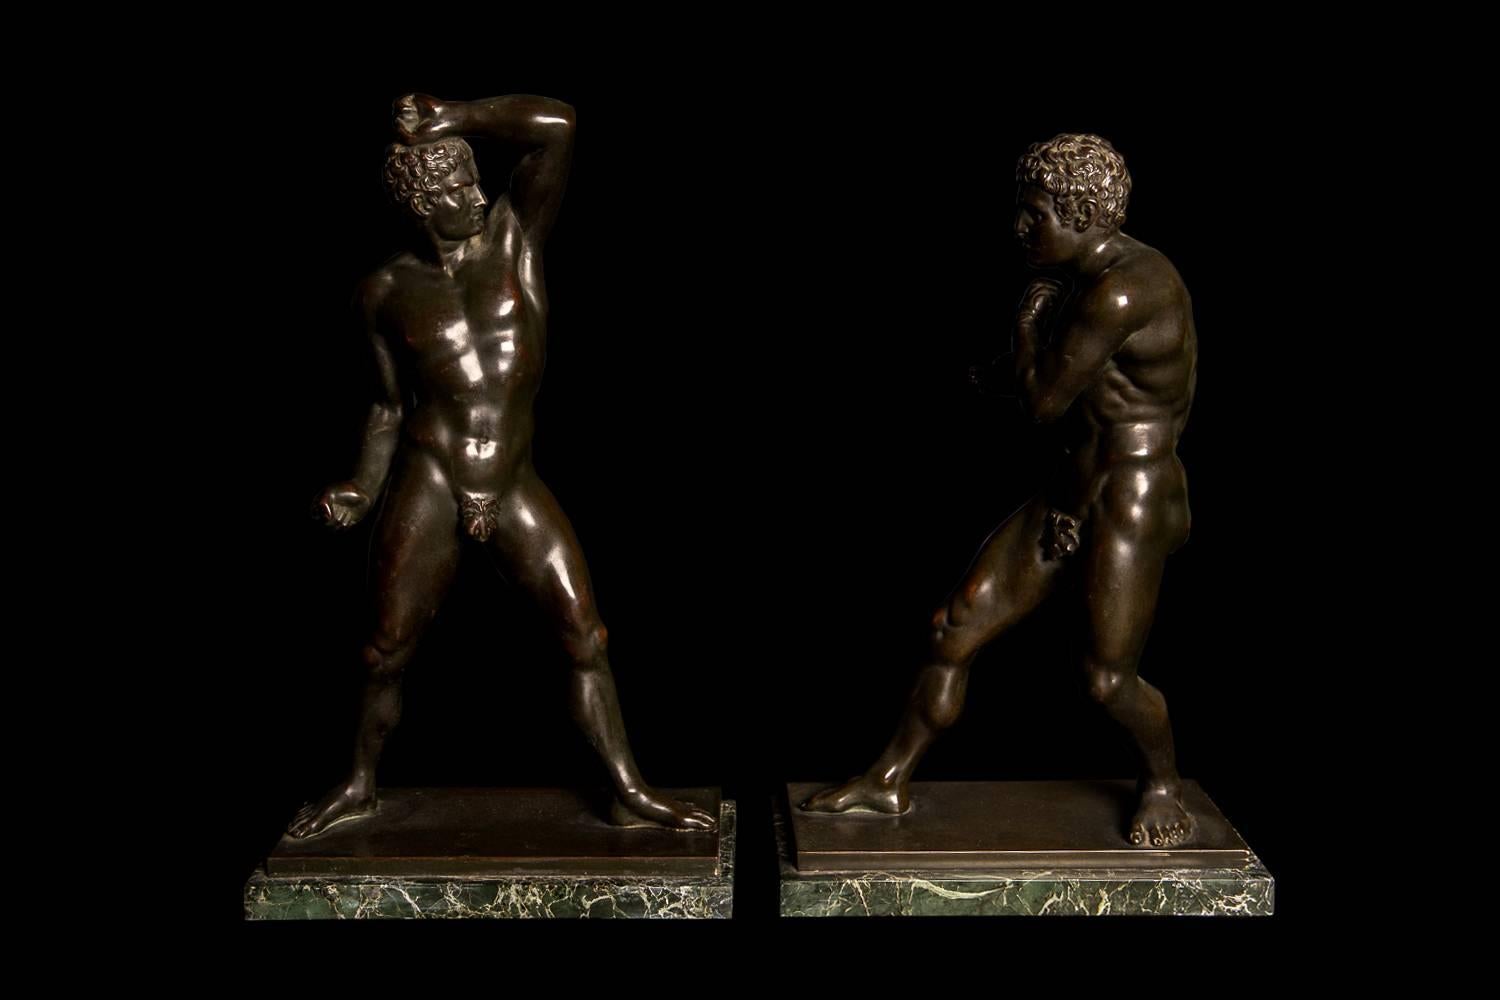 Stunning figures of substantial proportions and beautifully cast, these are the dramatic patinated bronze puglists Creugas and Damoxenos, after Canova. The originals can be seen in the Octagonal courtyard in the Vatican. Mounted on green marble